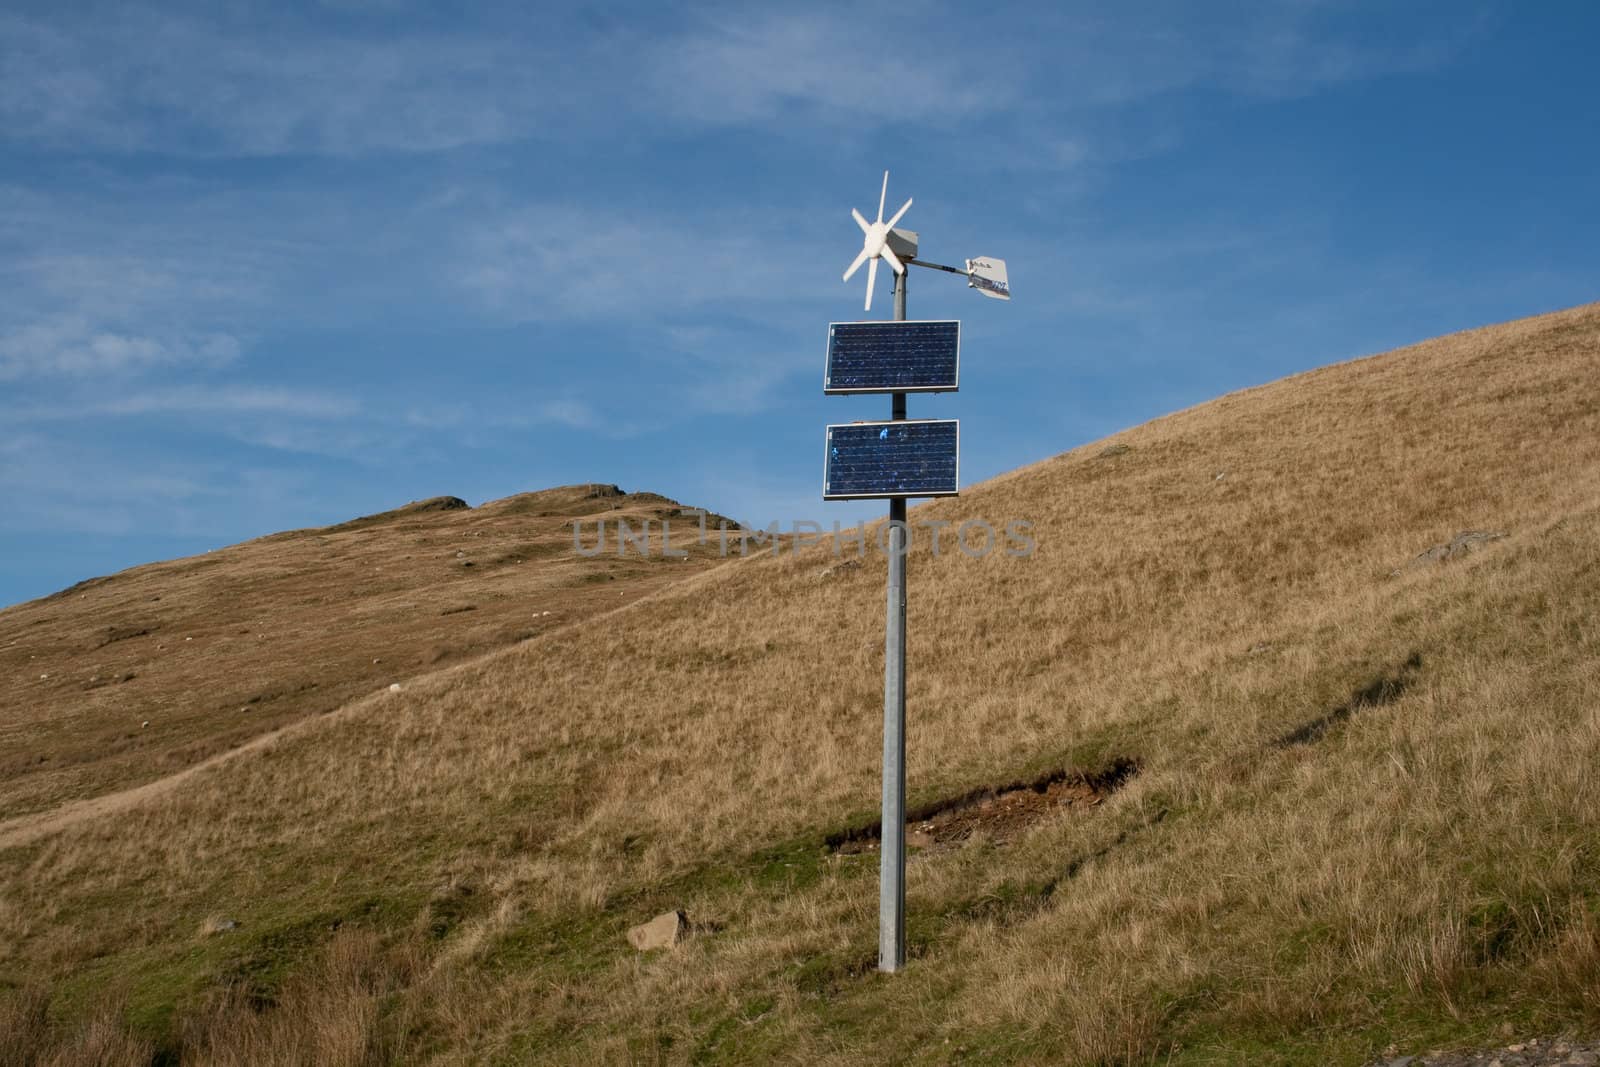 Wind turbine and solar panel combination on mountain side.